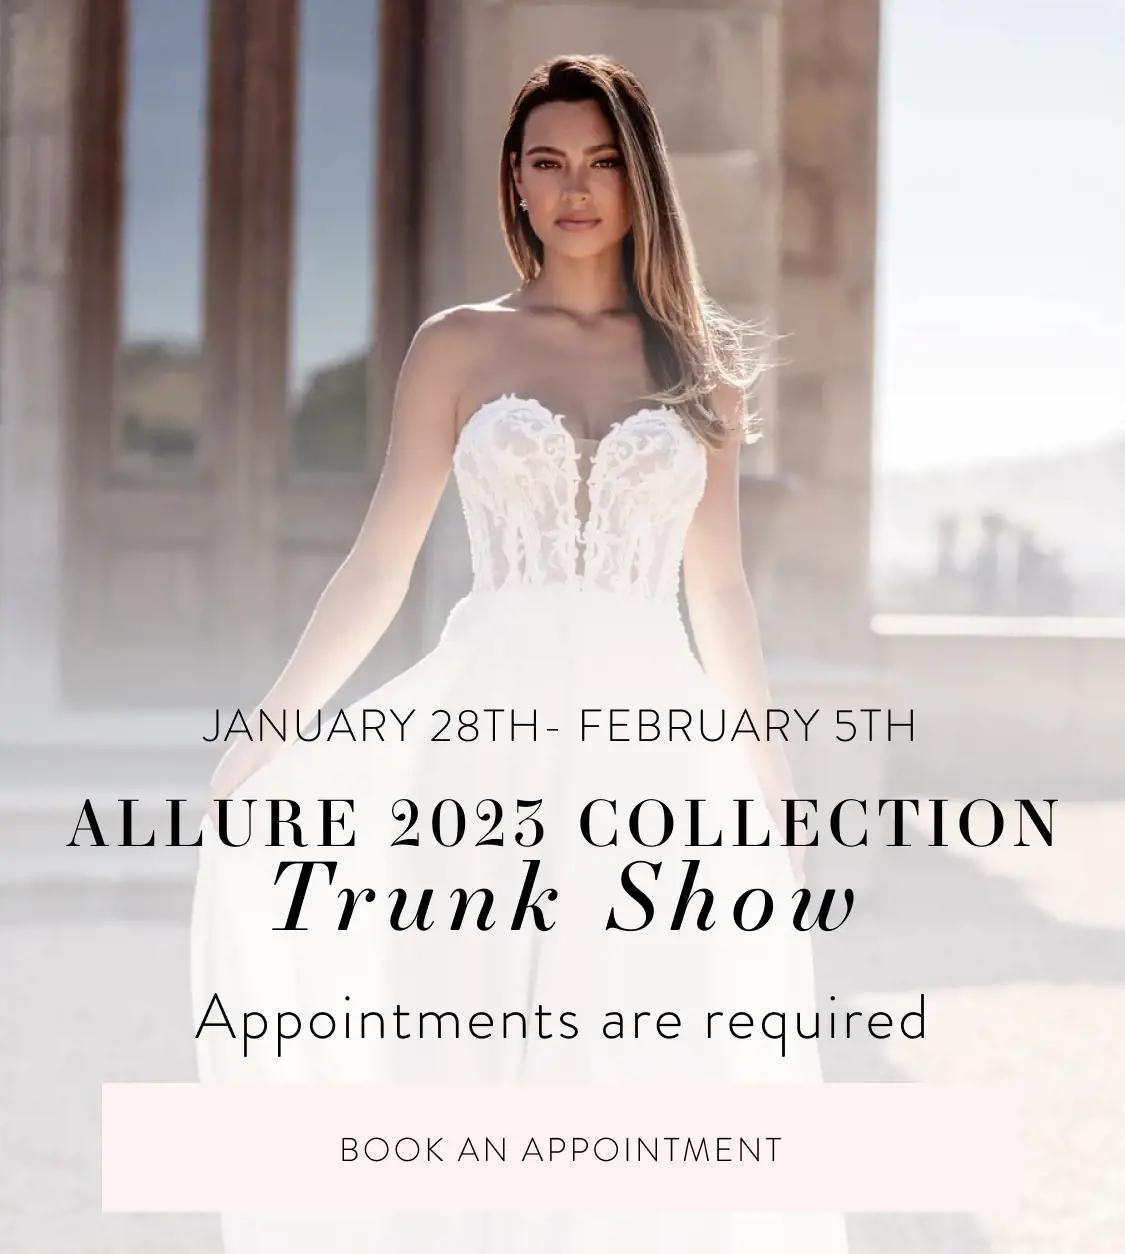 "Allure 2023 Collection Trunk Show" banner for mobile